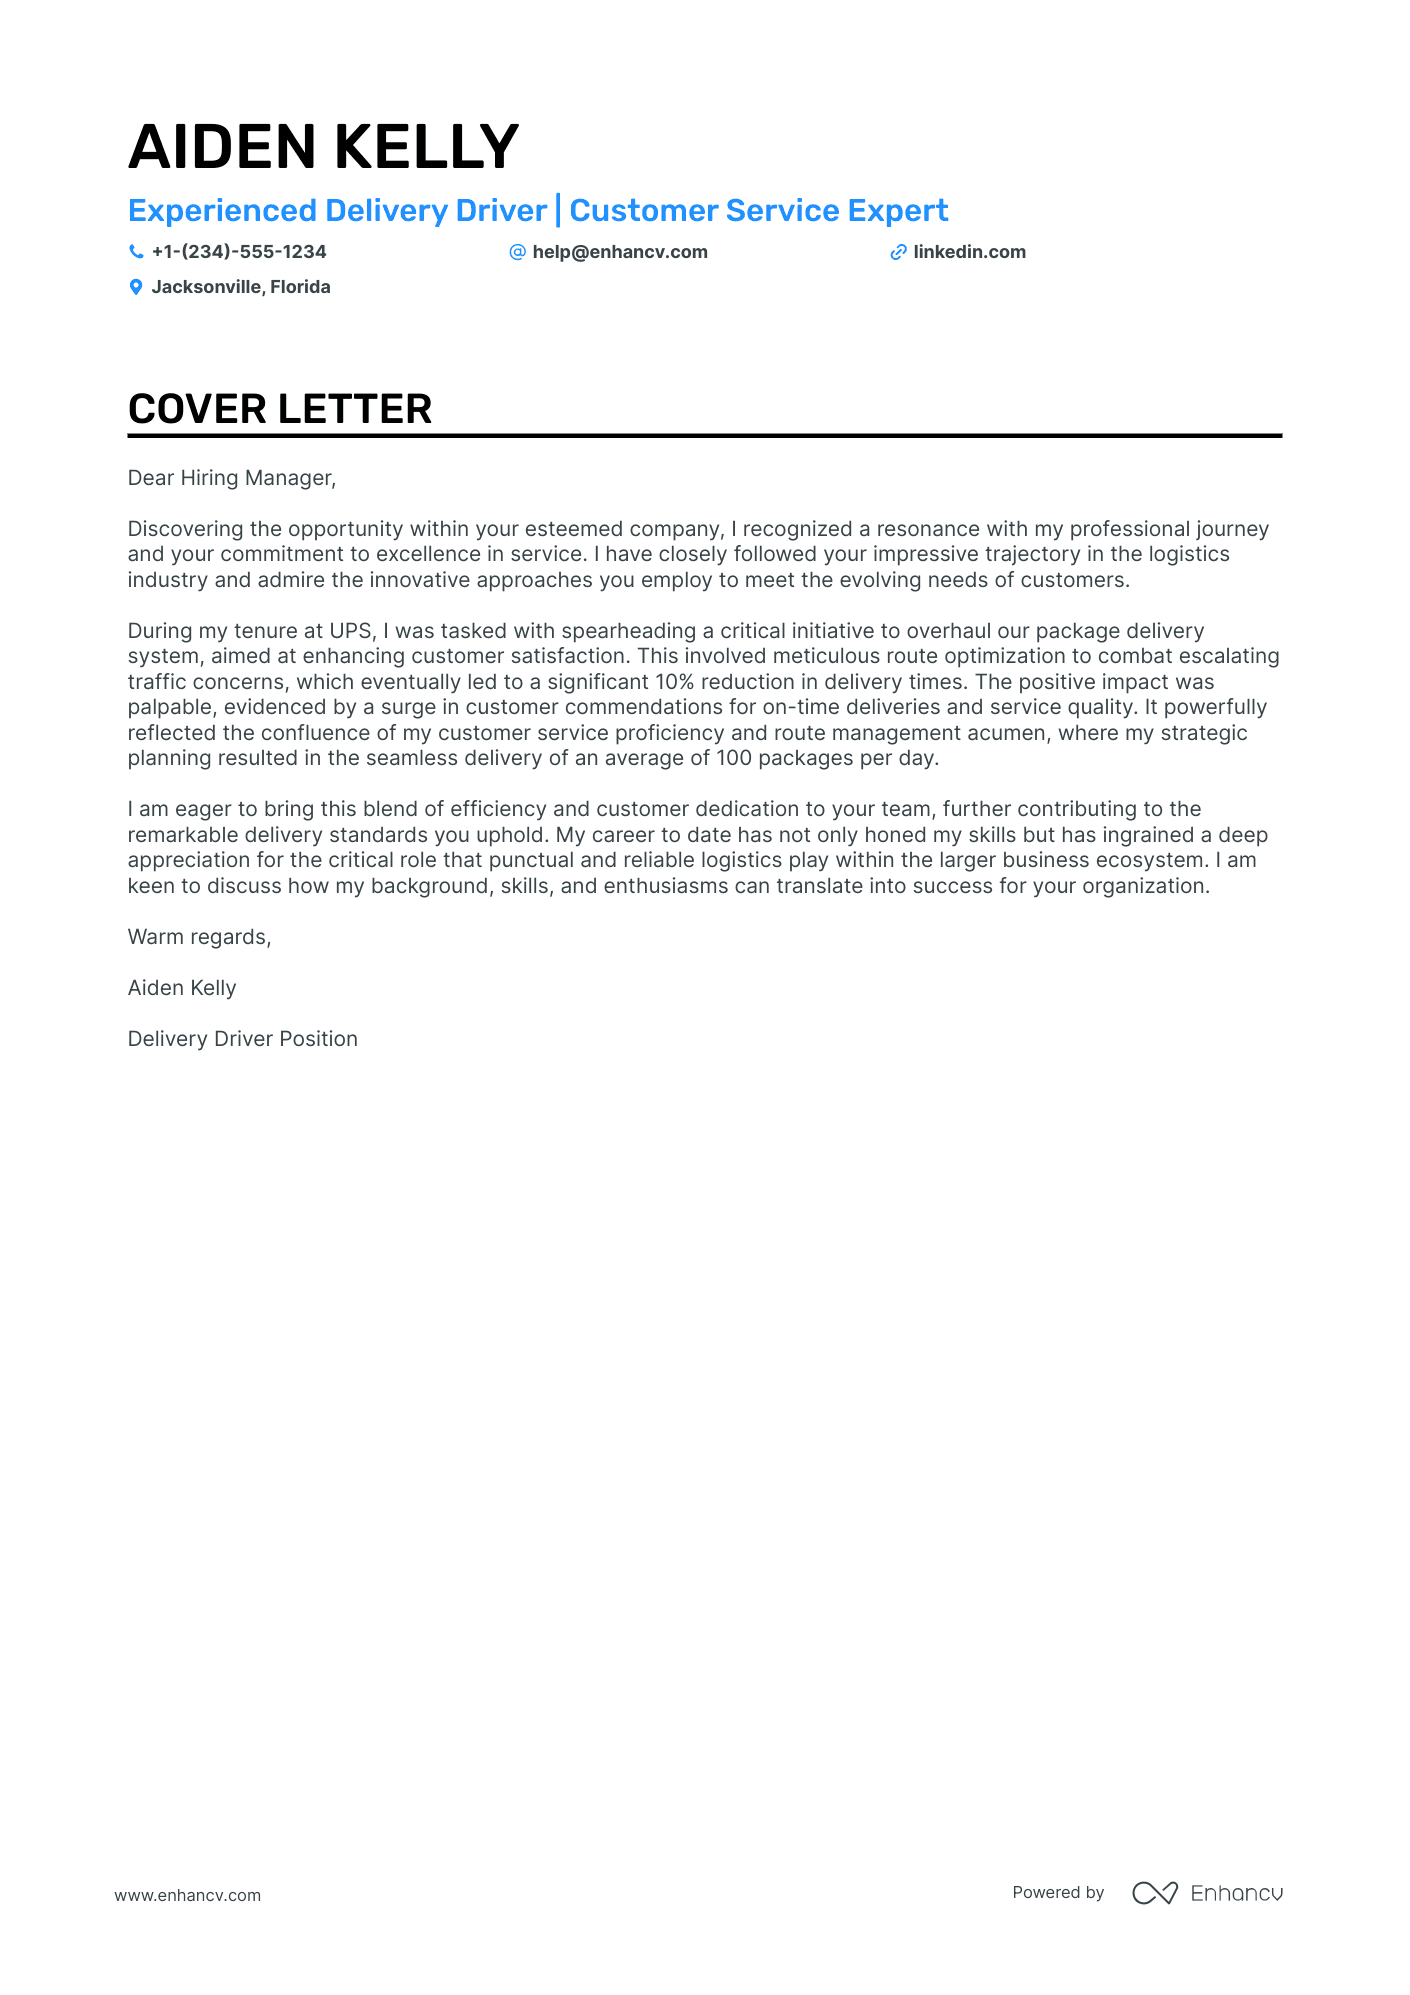 Amazon Delivery Driver cover letter